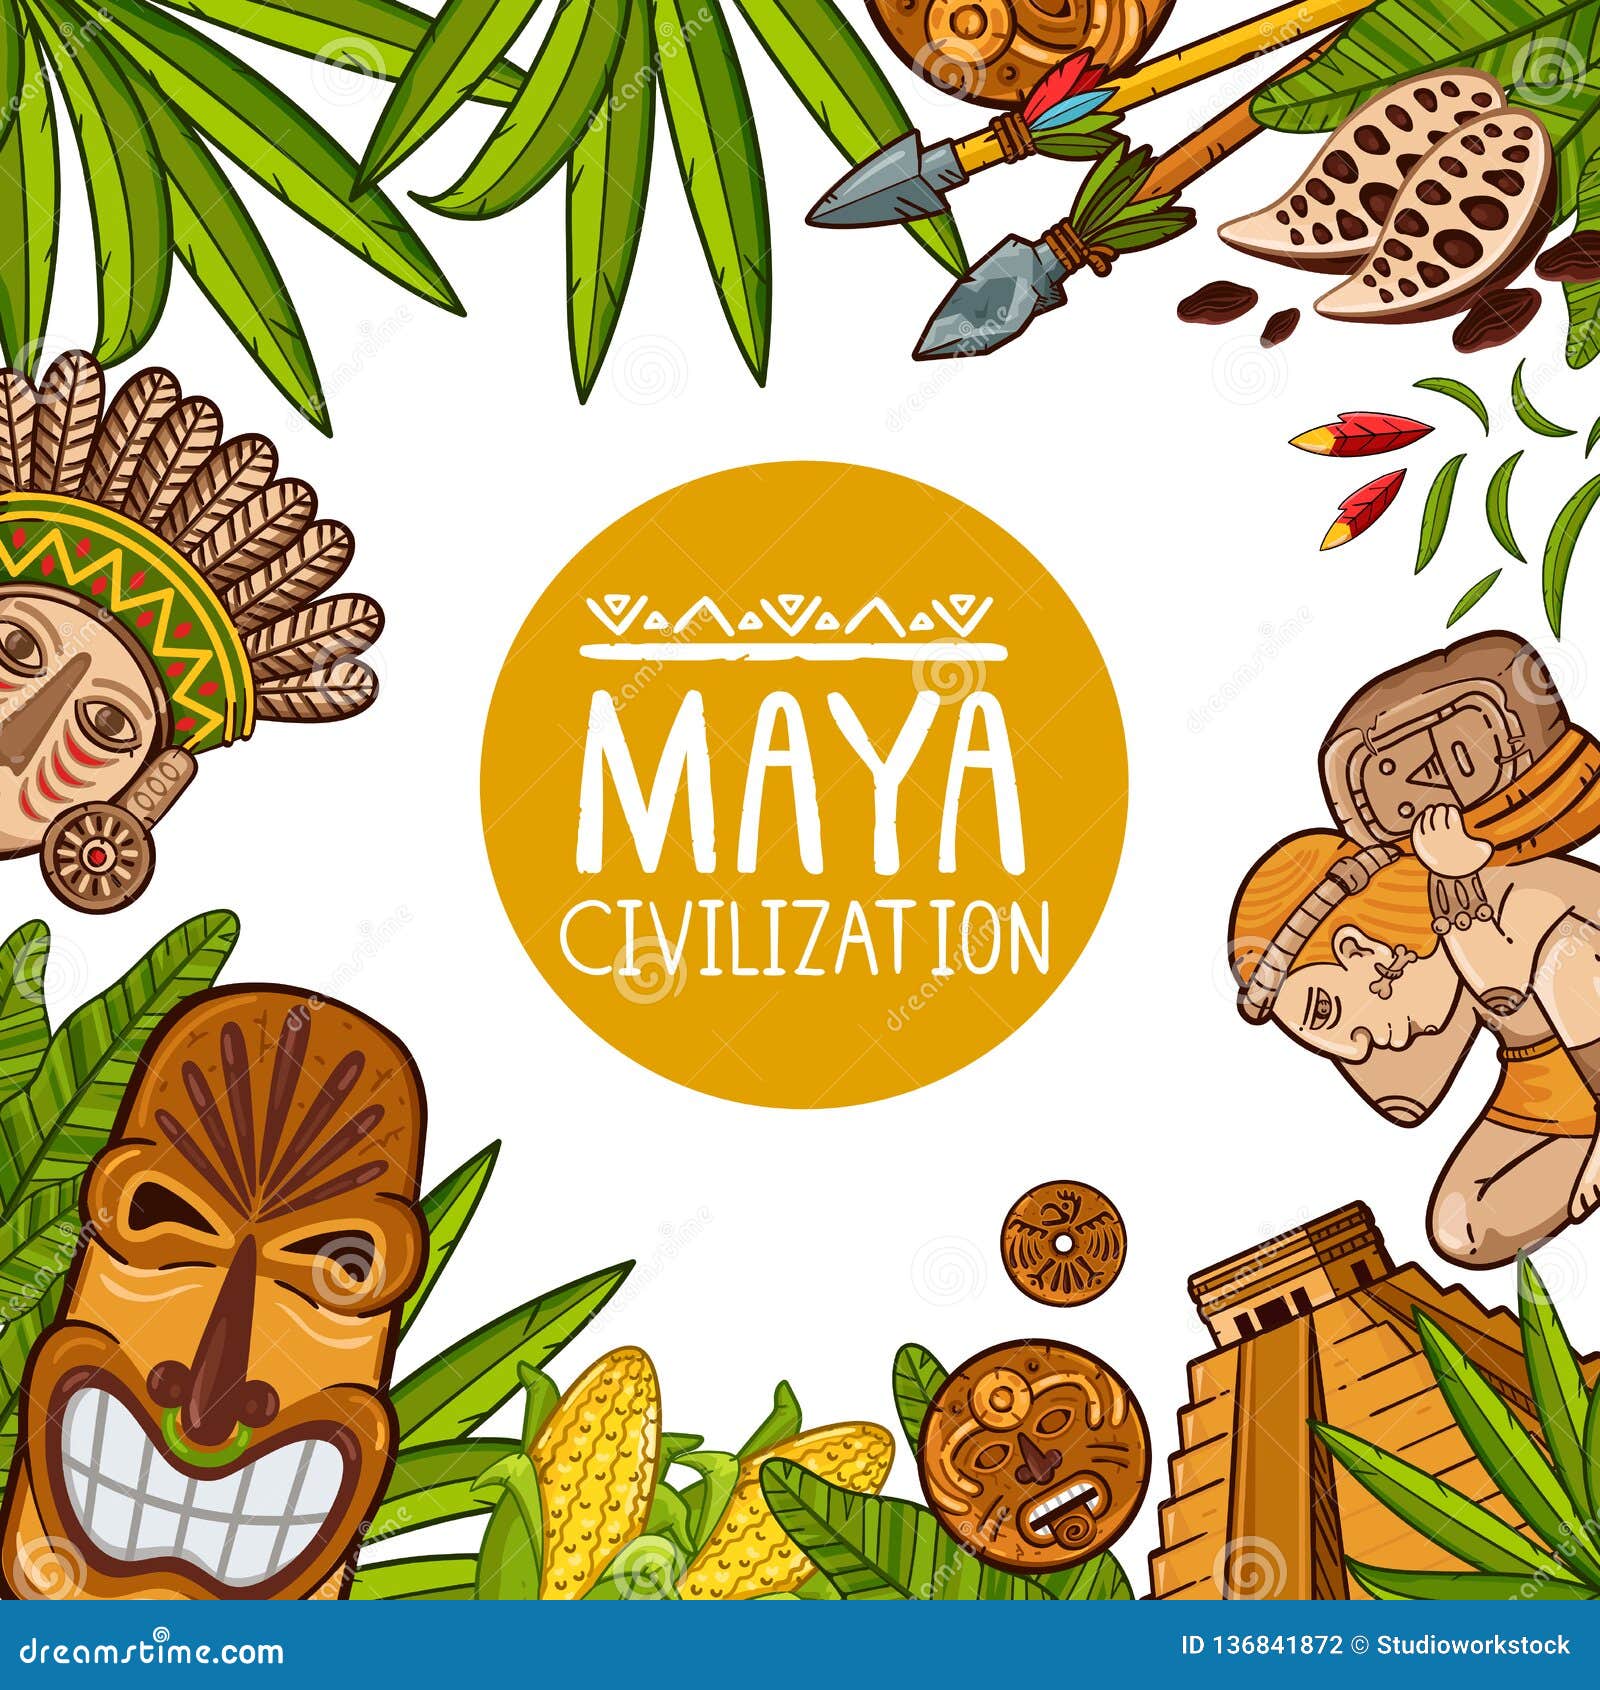 Colorful Design of Poster about Maya Civilization Stock Illustration ...